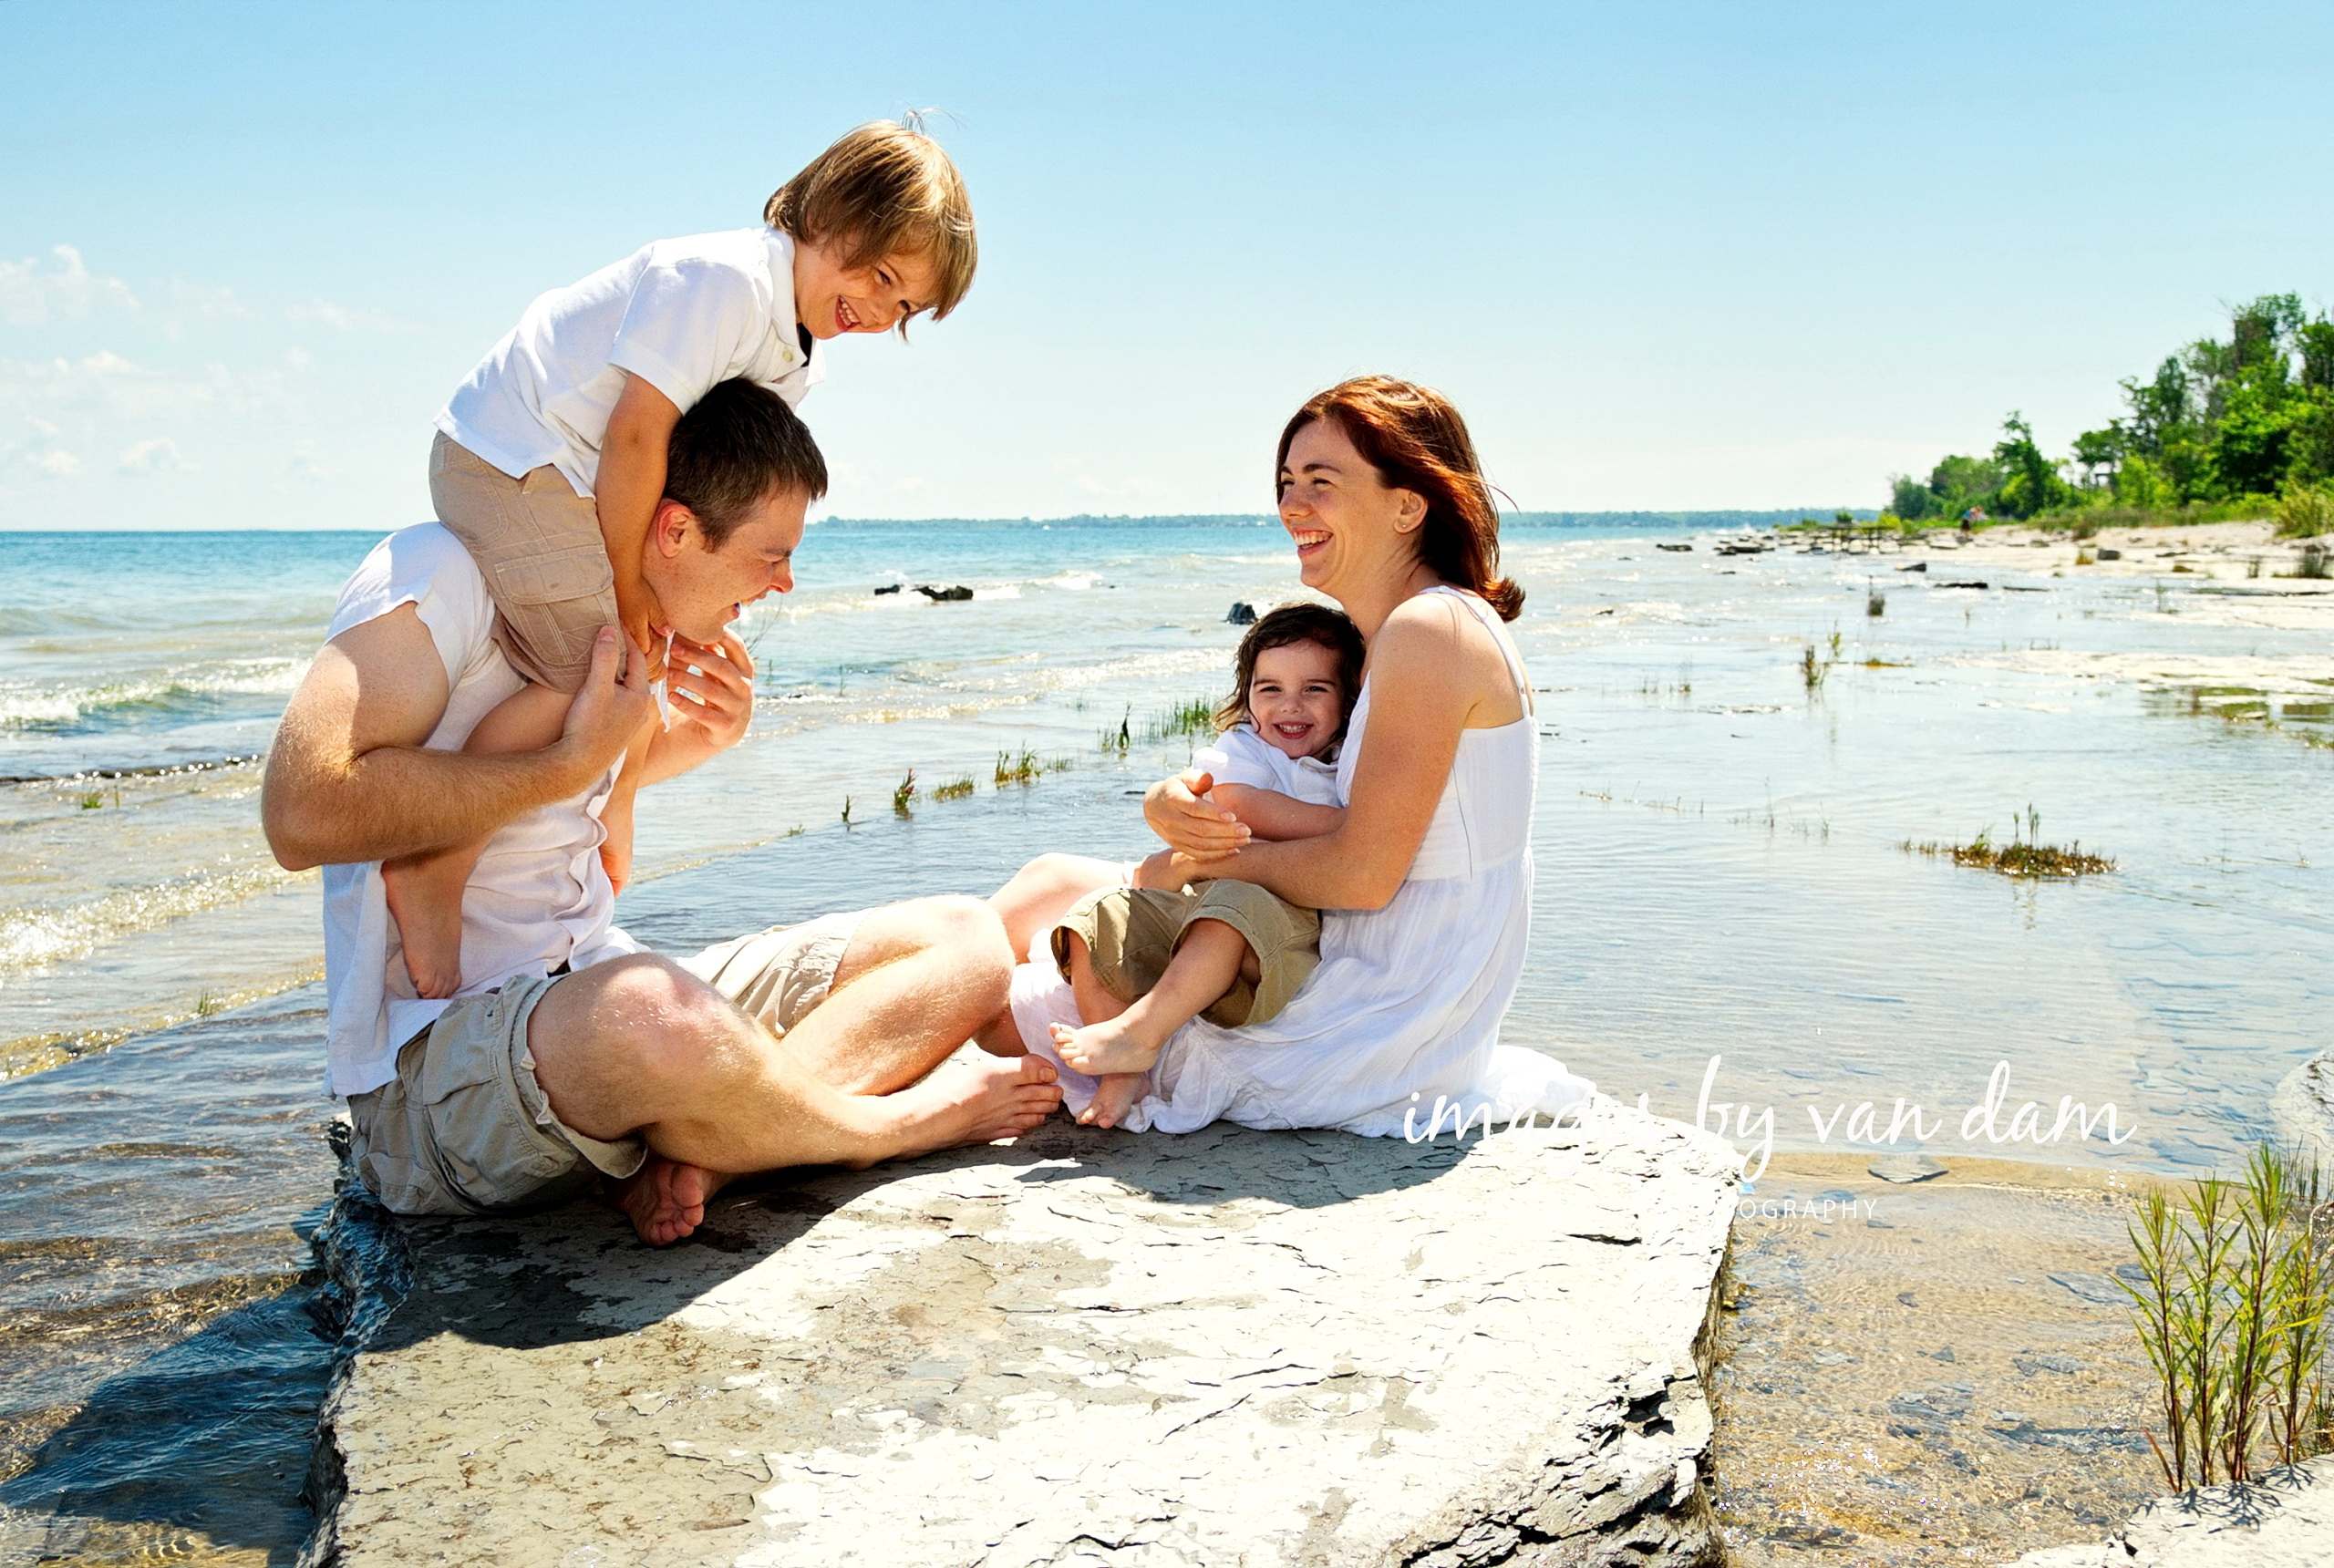 A young Family Enjoys a Lovely Moment on the Shale Beach at Craigleith Park